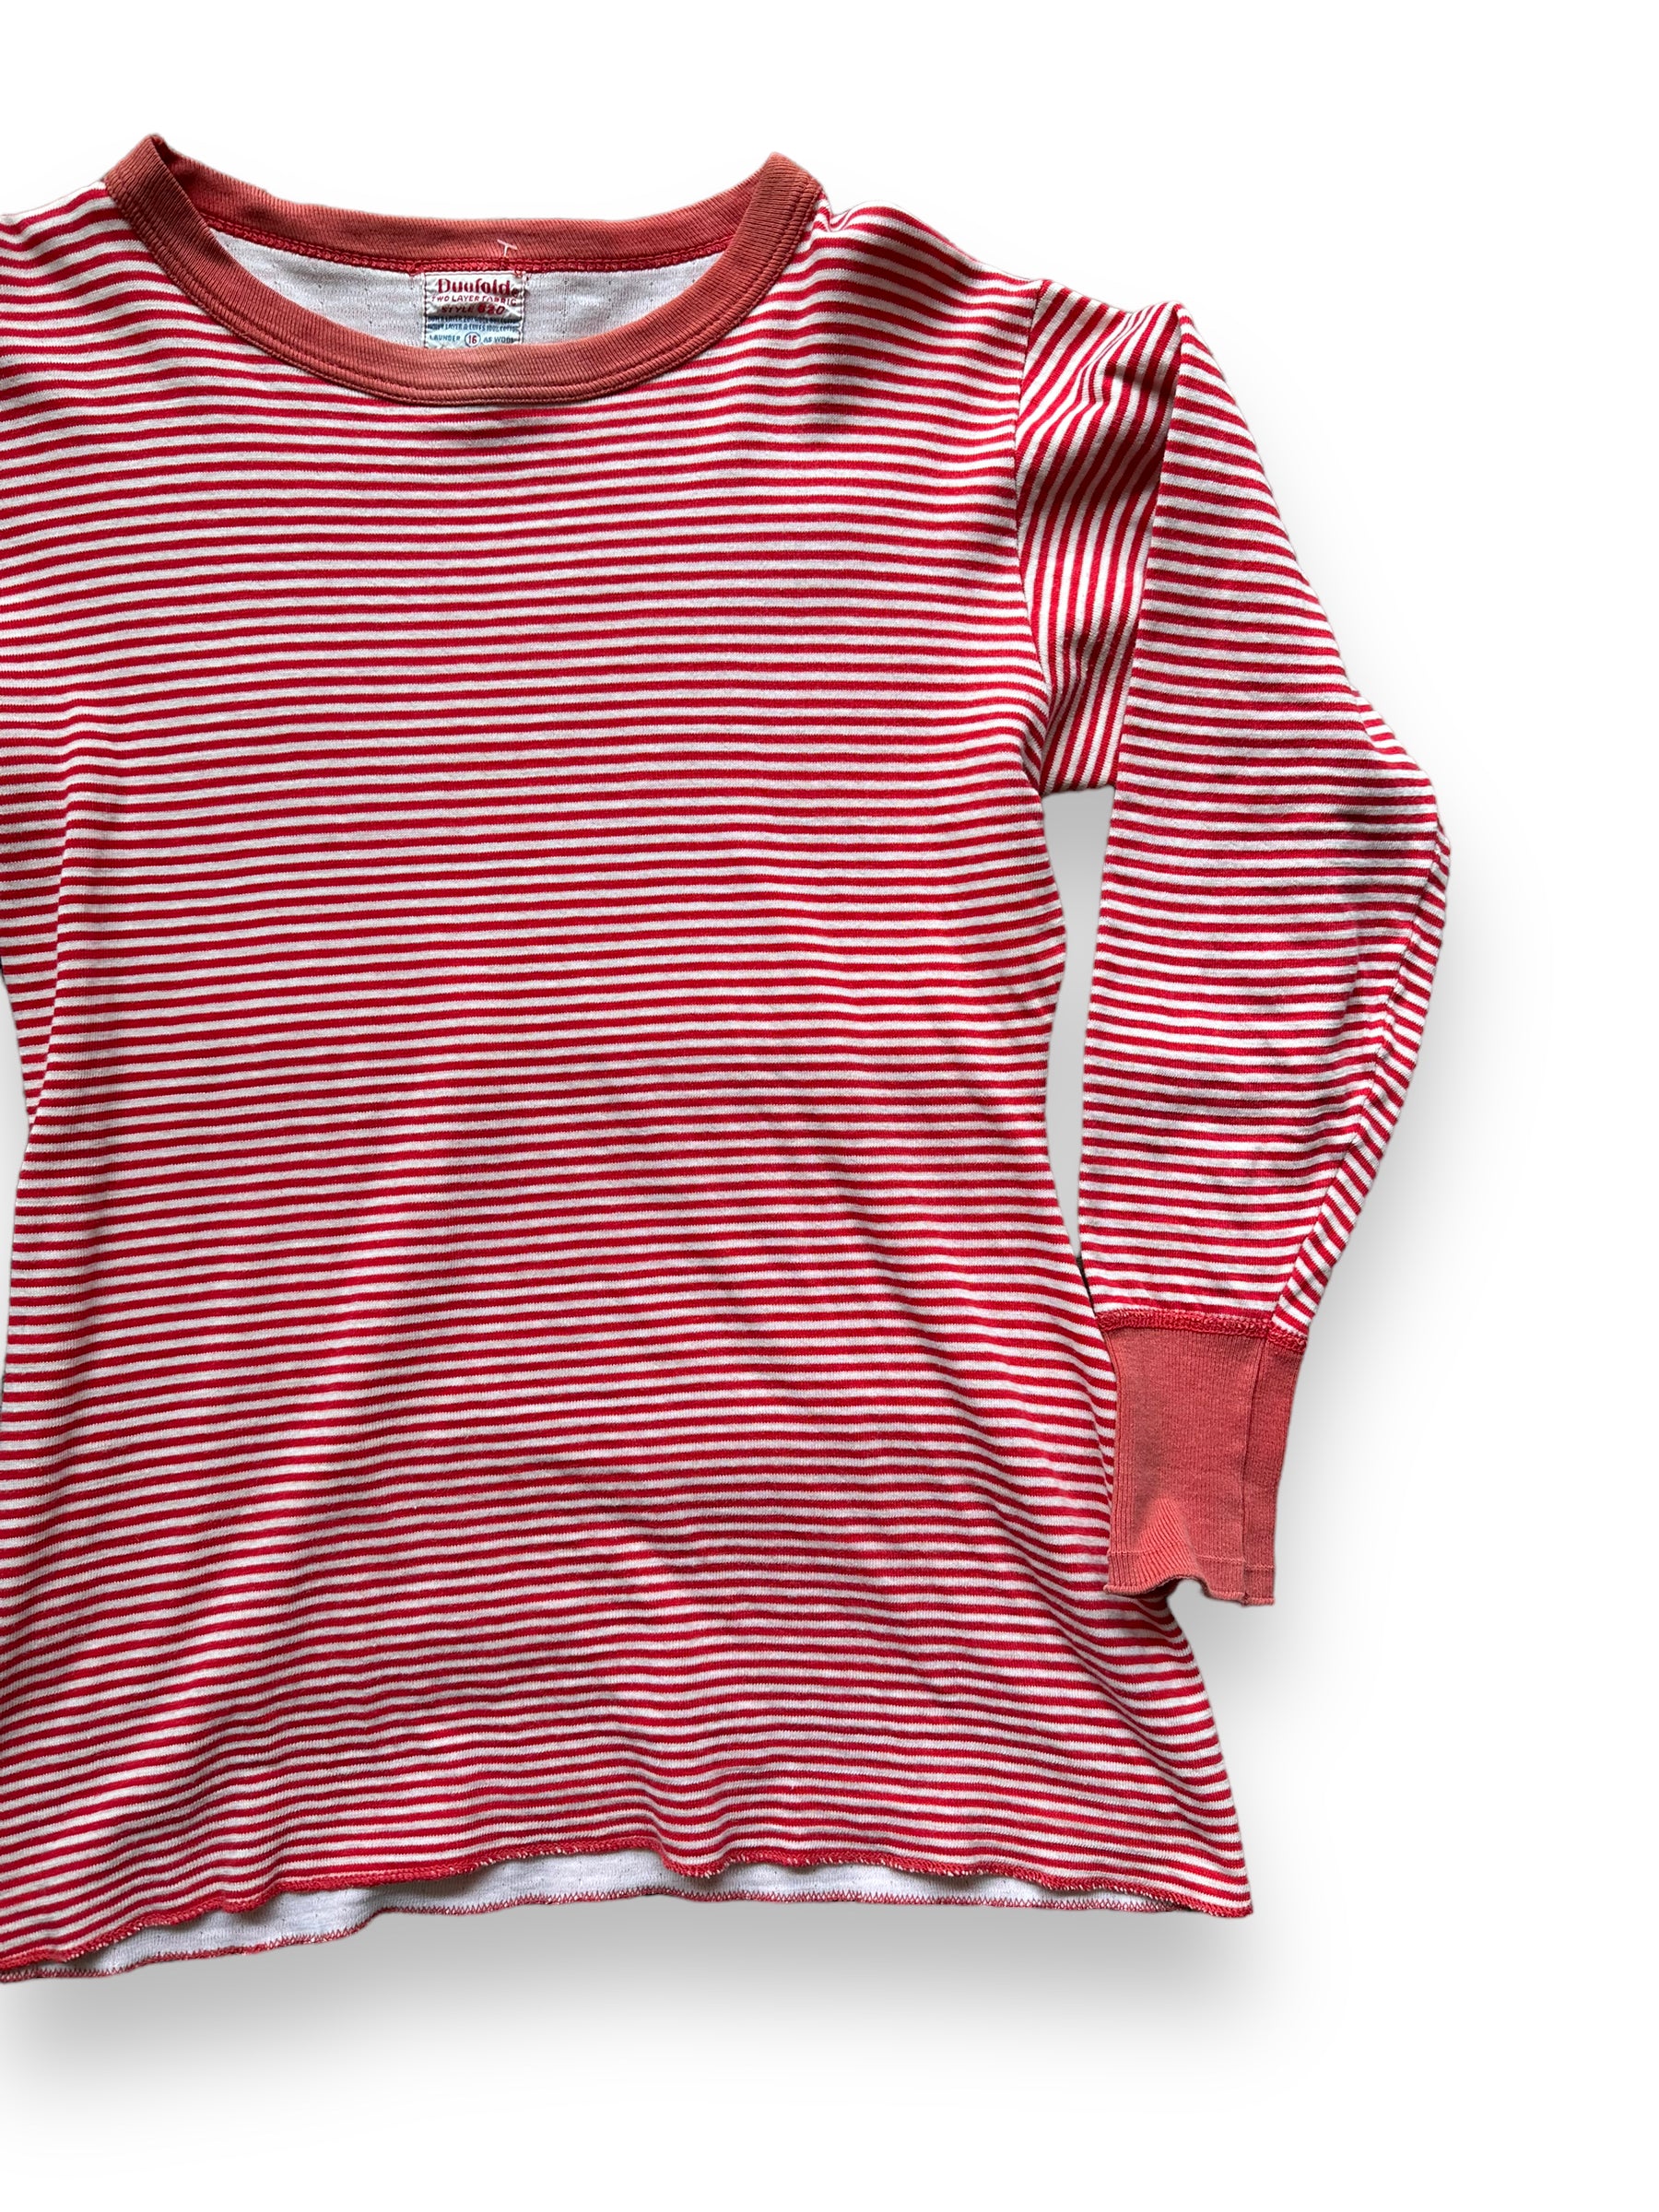 Front Left View on Vintage Duofold Striped Thermal Top SZ M | Vintage Thermal Underwear Seattle | Barn Owl Vintage Goods